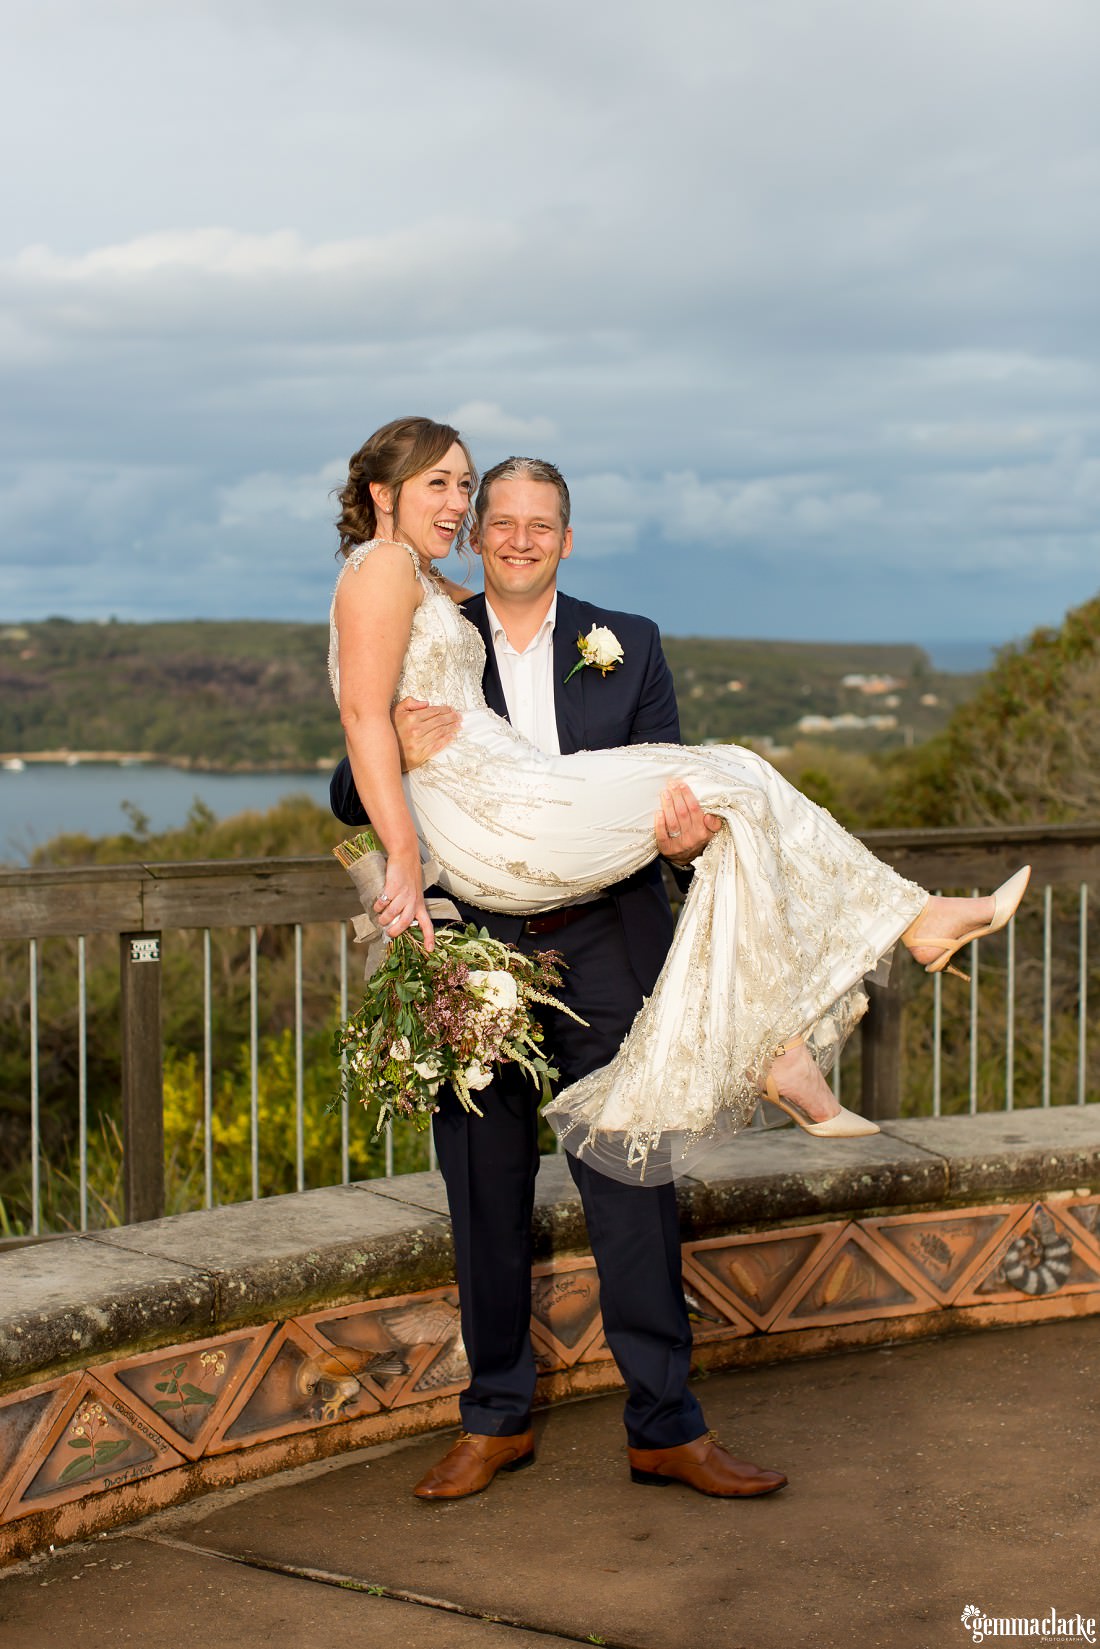 A groom holds up his bride at a lookout